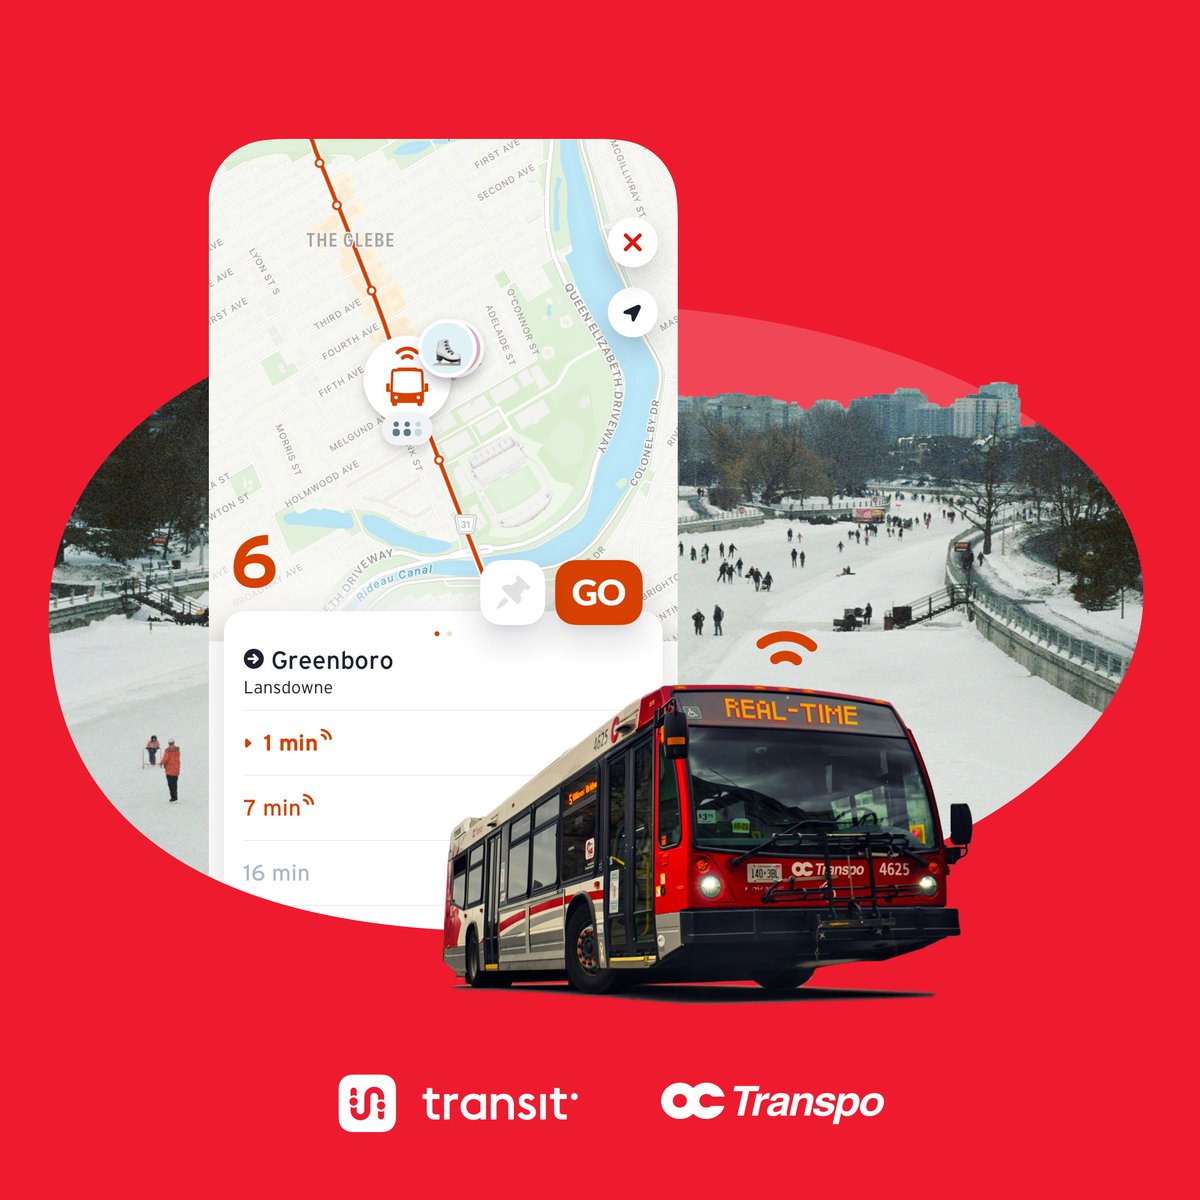 Big day for our friends in Ottawa: 🍾 @OC_Transpo has upgraded their real-time 🌷 Which means you can (finally!) use GO crowdsourcing in our nation's capital 🎯 Better source data + GO = the best bus locations in Bytown ⛸️ This update laces-in better trip cancellation info, too!